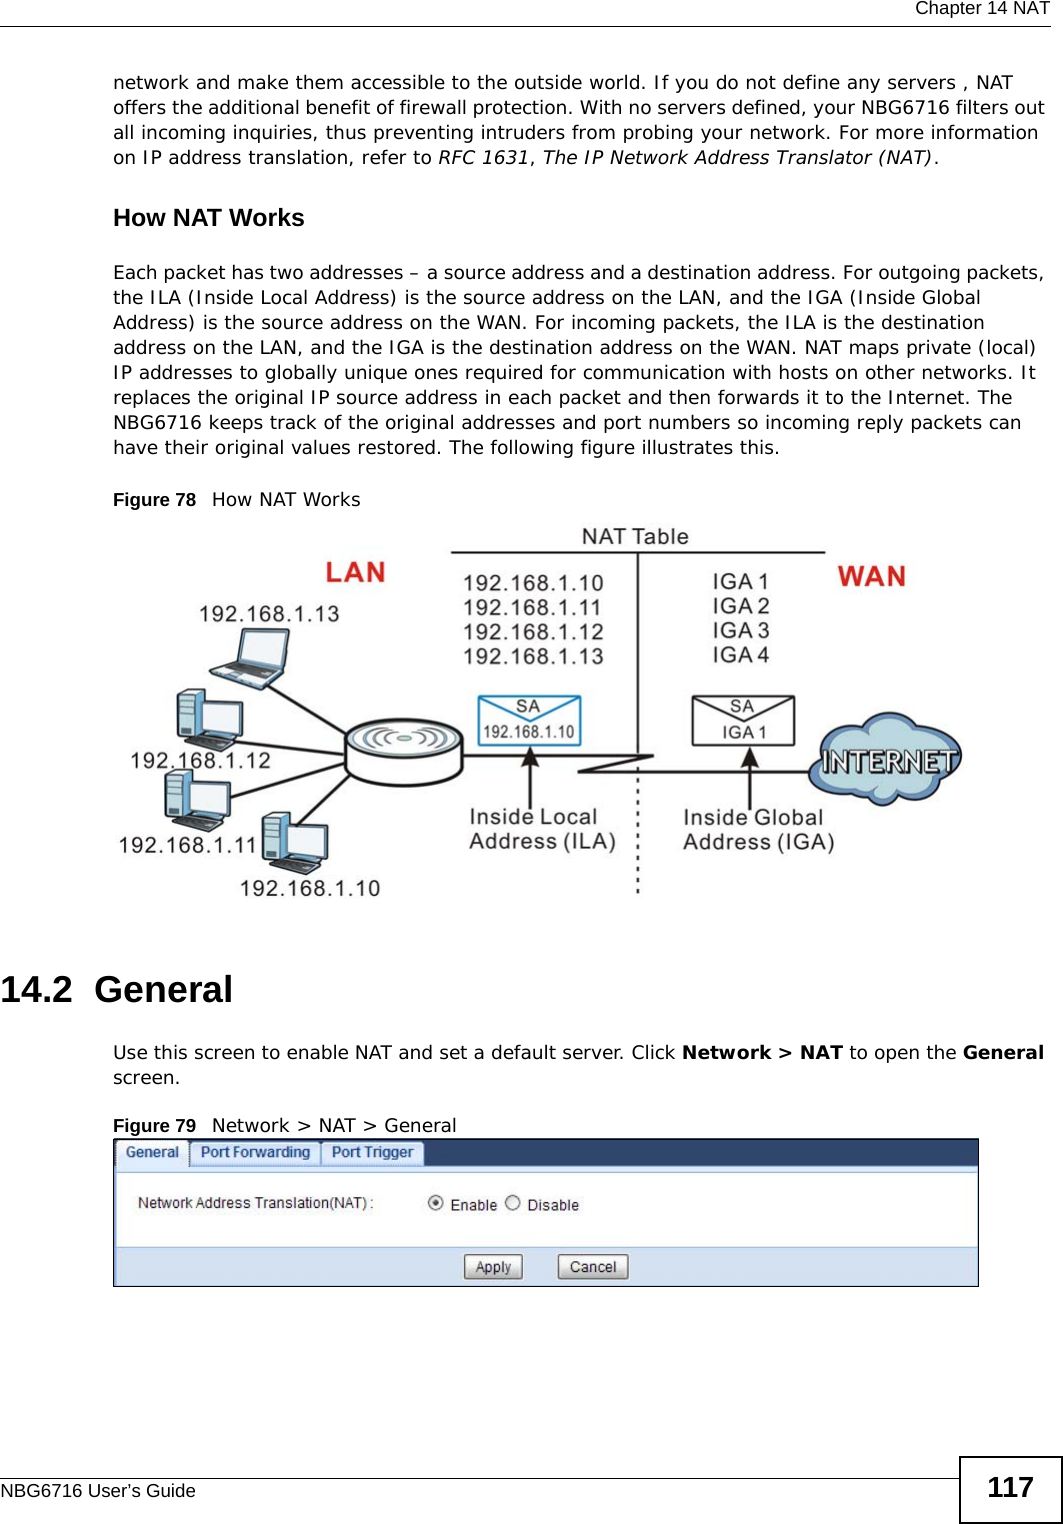  Chapter 14 NATNBG6716 User’s Guide 117network and make them accessible to the outside world. If you do not define any servers , NAT offers the additional benefit of firewall protection. With no servers defined, your NBG6716 filters out all incoming inquiries, thus preventing intruders from probing your network. For more information on IP address translation, refer to RFC 1631, The IP Network Address Translator (NAT).How NAT WorksEach packet has two addresses – a source address and a destination address. For outgoing packets, the ILA (Inside Local Address) is the source address on the LAN, and the IGA (Inside Global Address) is the source address on the WAN. For incoming packets, the ILA is the destination address on the LAN, and the IGA is the destination address on the WAN. NAT maps private (local) IP addresses to globally unique ones required for communication with hosts on other networks. It replaces the original IP source address in each packet and then forwards it to the Internet. The NBG6716 keeps track of the original addresses and port numbers so incoming reply packets can have their original values restored. The following figure illustrates this.Figure 78   How NAT Works14.2  GeneralUse this screen to enable NAT and set a default server. Click Network &gt; NAT to open the General screen.Figure 79   Network &gt; NAT &gt; General 